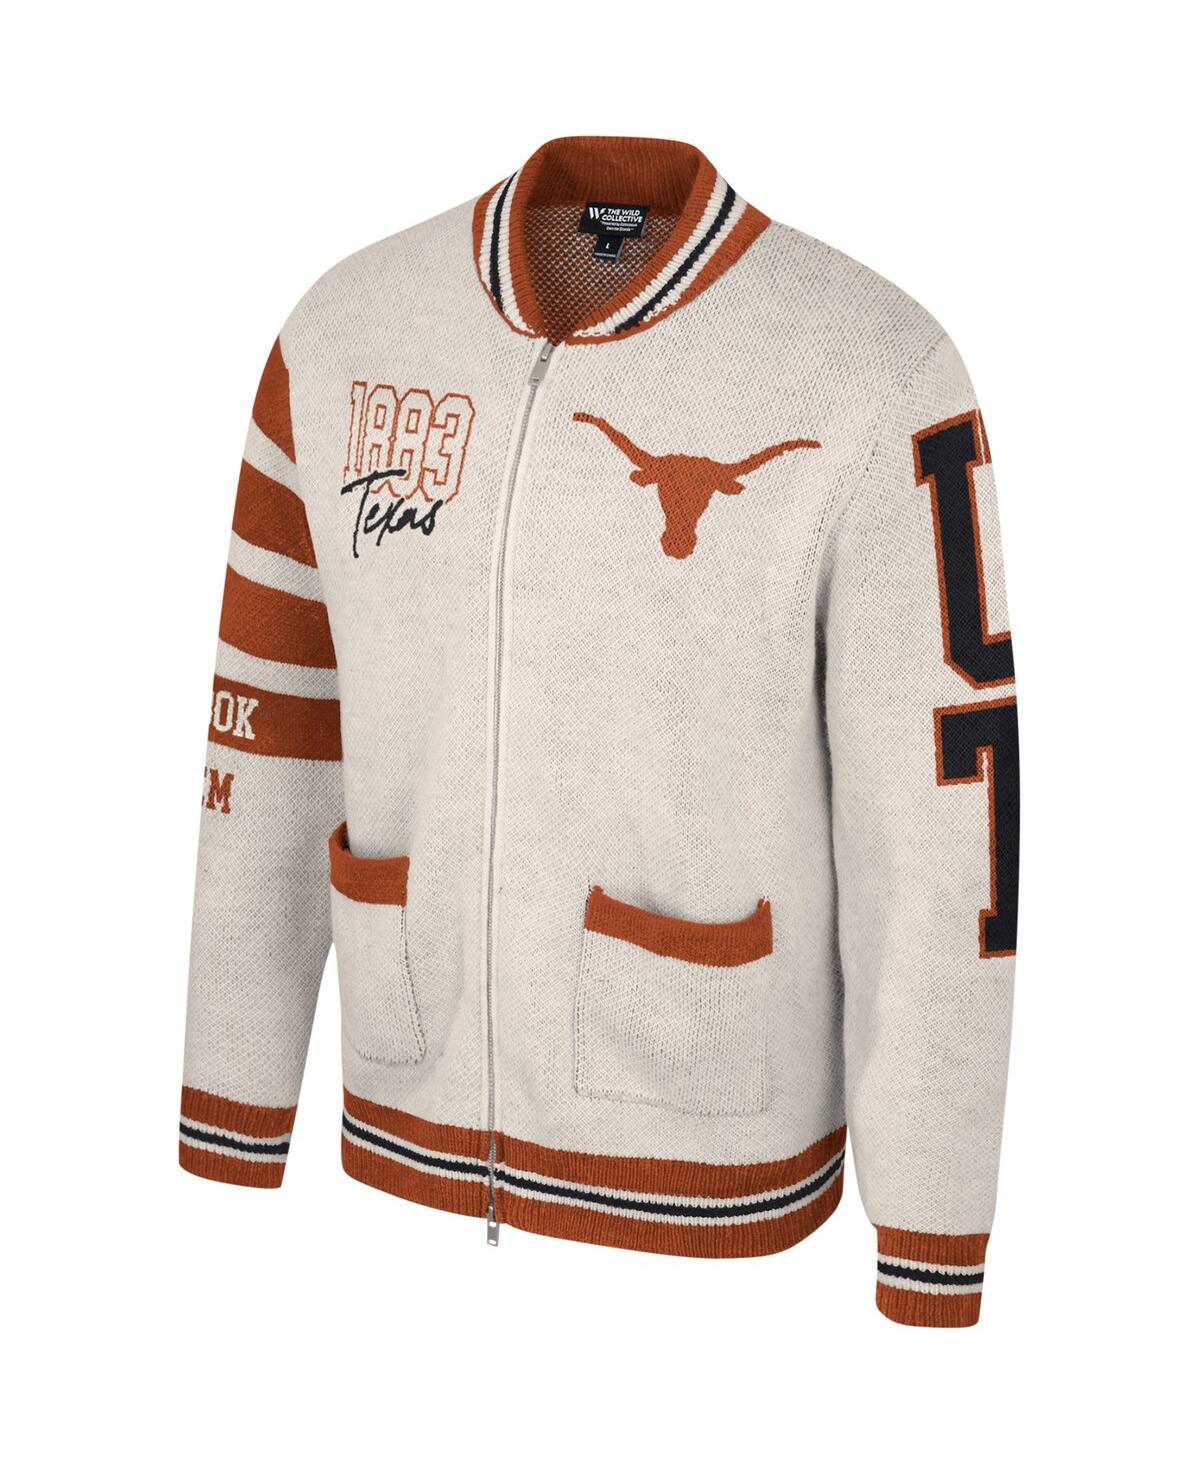 Shop The Wild Collective Men's And Women's  Cream Texas Longhorns Jacquard Full-zip Sweater